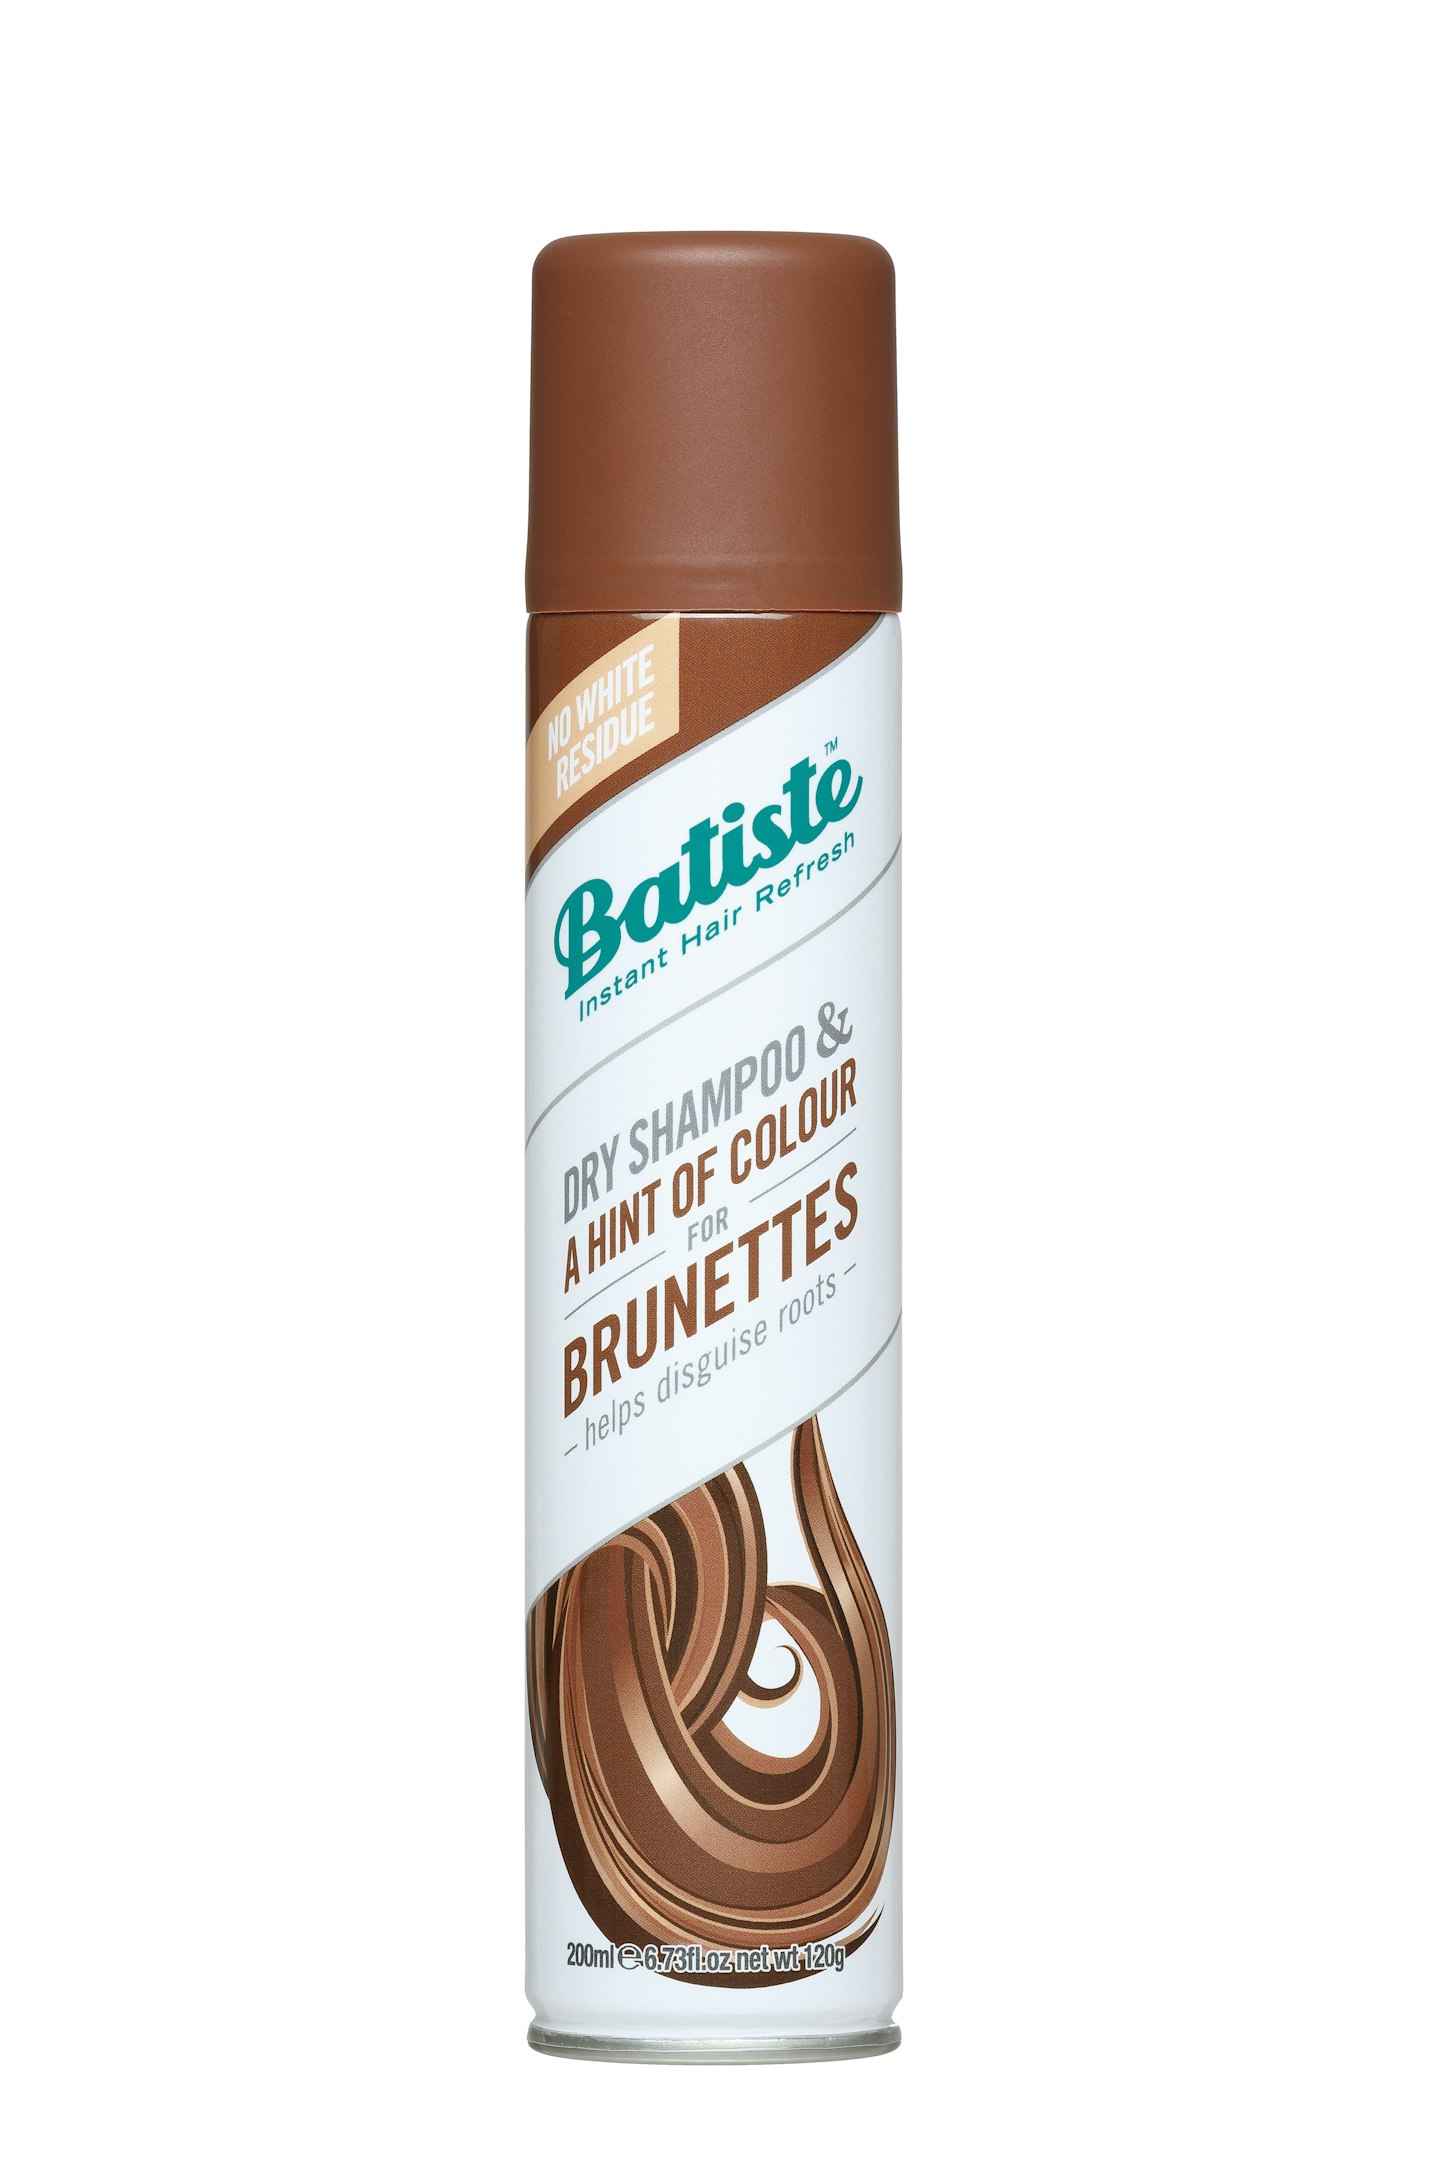 Batiste dry shamoo and a hint of colour for brunettes